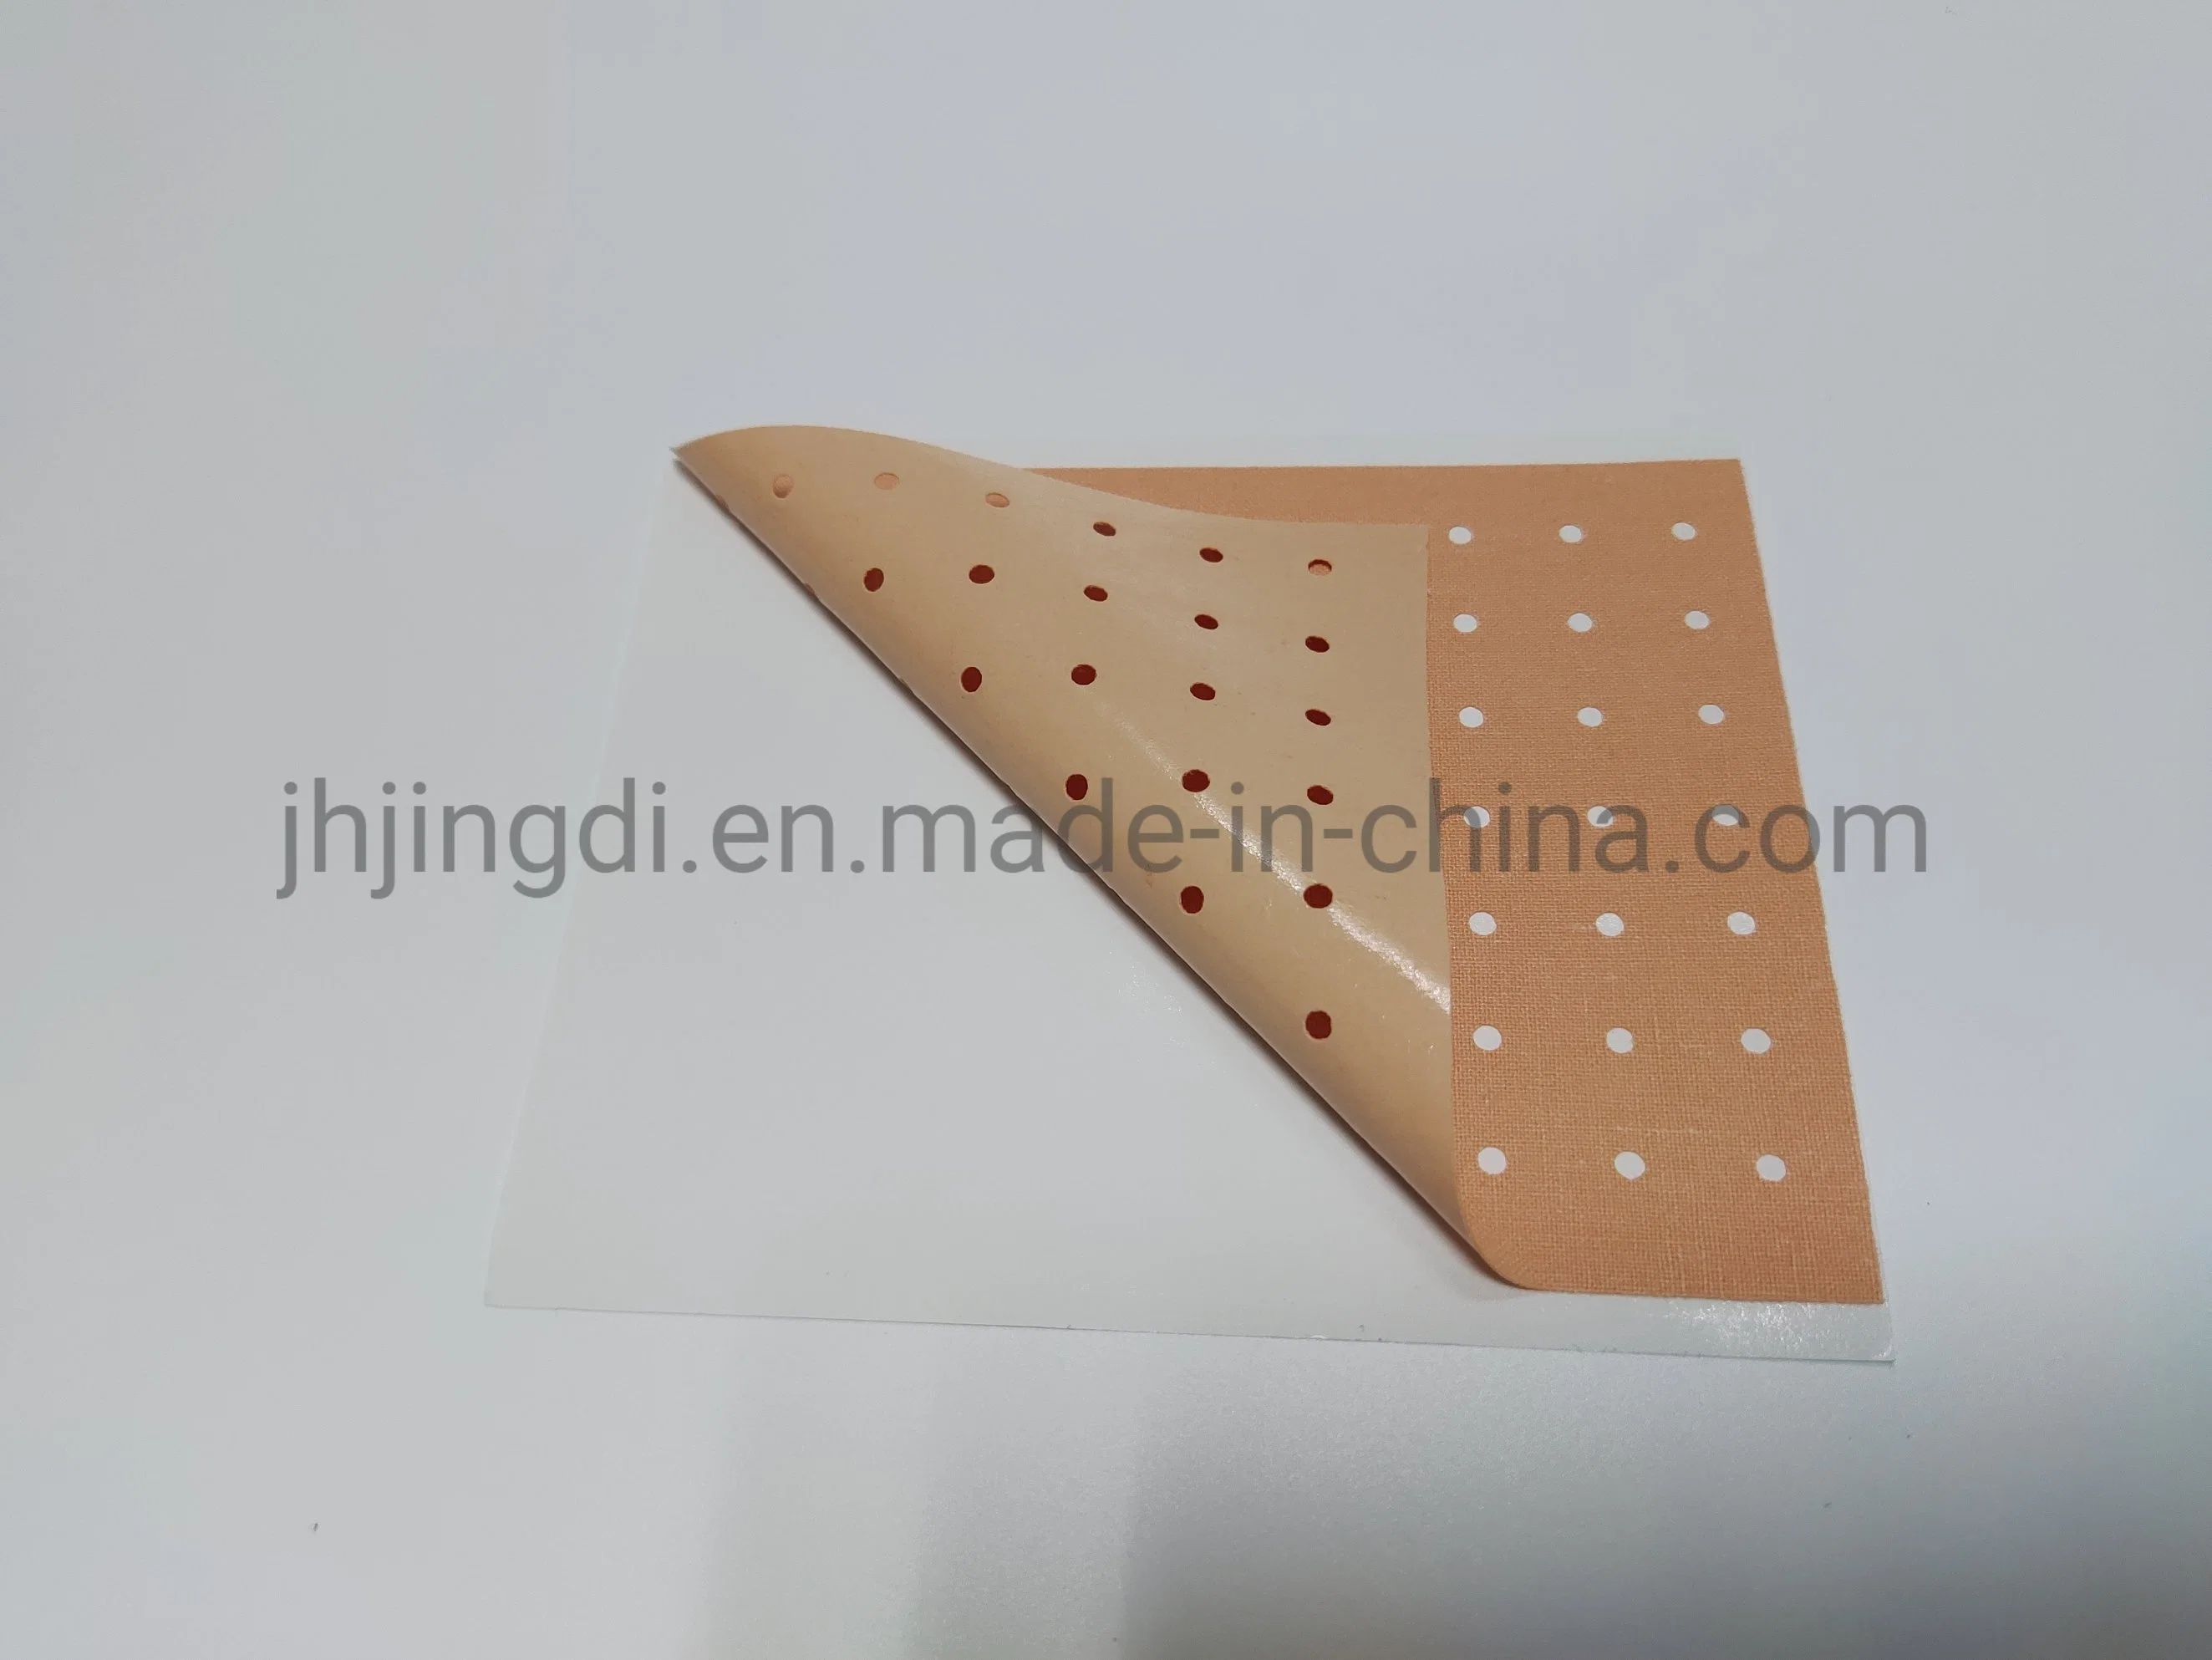 Hot Selling Pain Relief Patch Capsicum Plaster Traditional Plaster